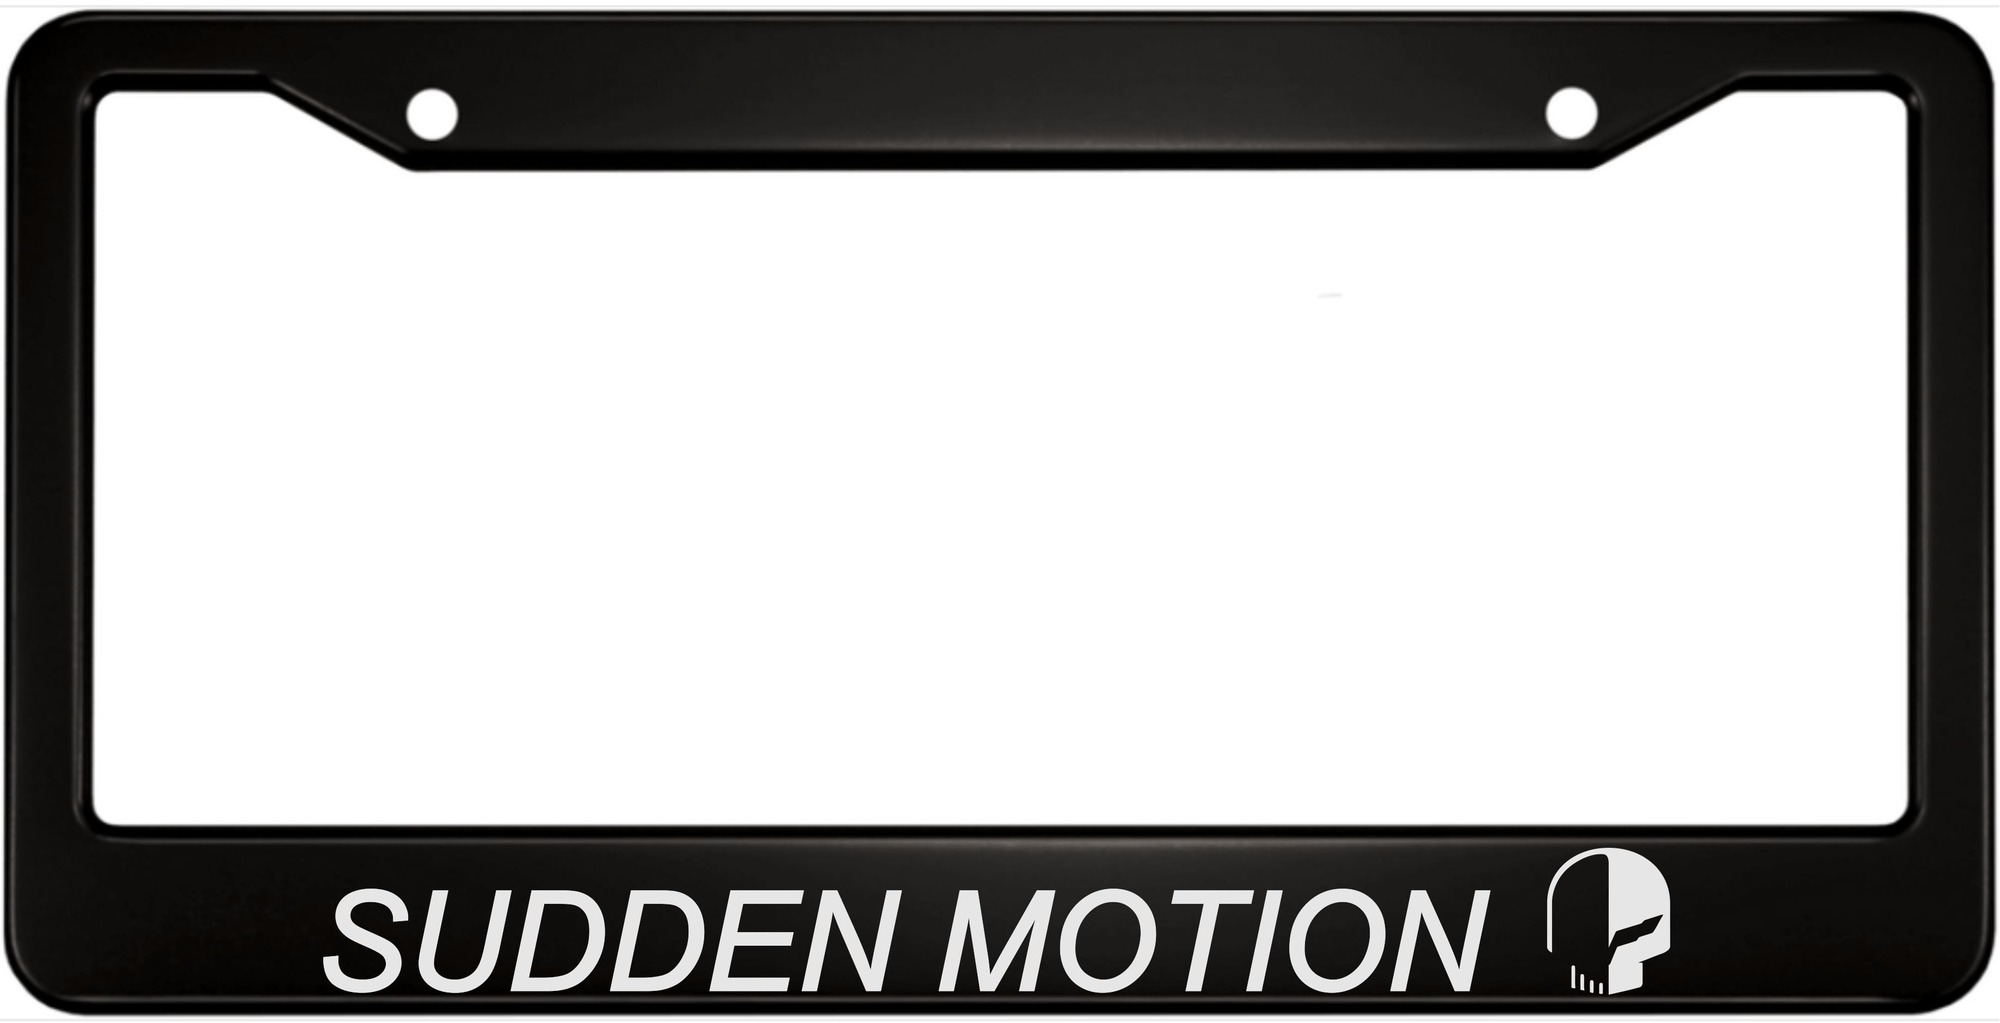 Sudden Motion - Personalized Aluminum Car License Plate Frame